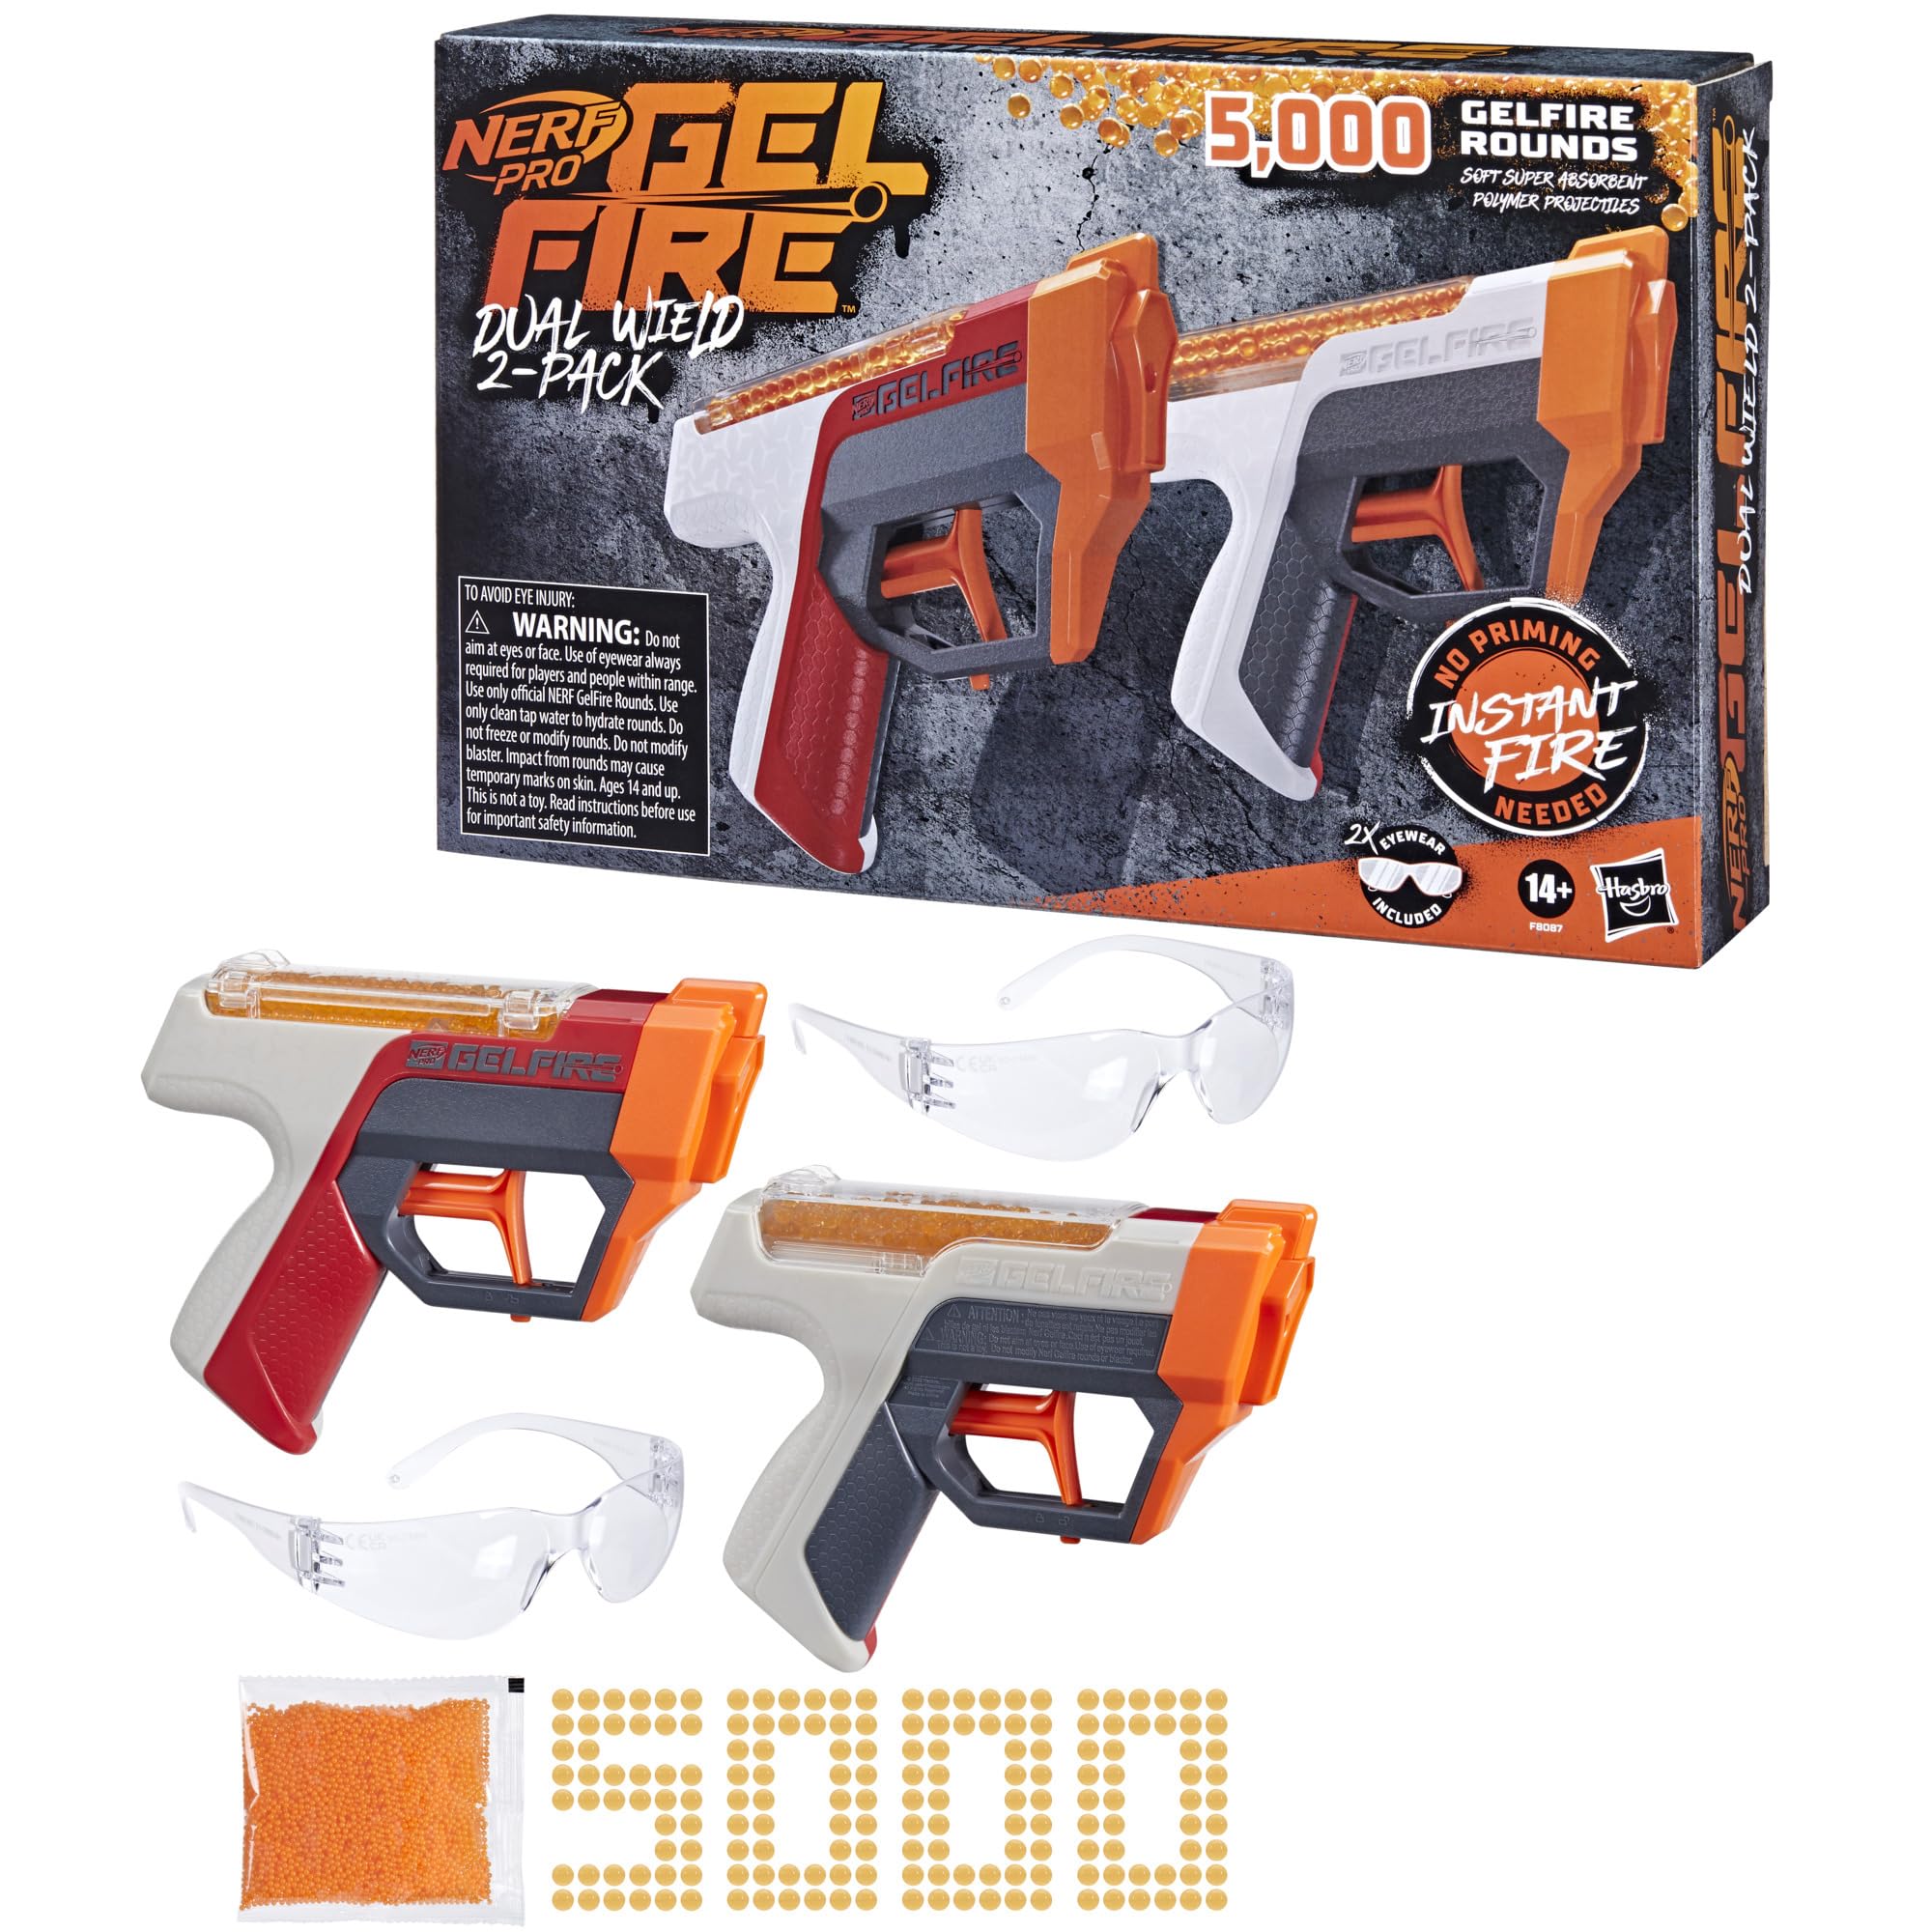 NERF Pro Gelfire Dual Wield Pack, 2 Blasters, No-Prime Firing, 5000 Gelfire Rounds, 2X 100 Round Integrated Hoppers, 2 Eyewear, Ages 14 & Up